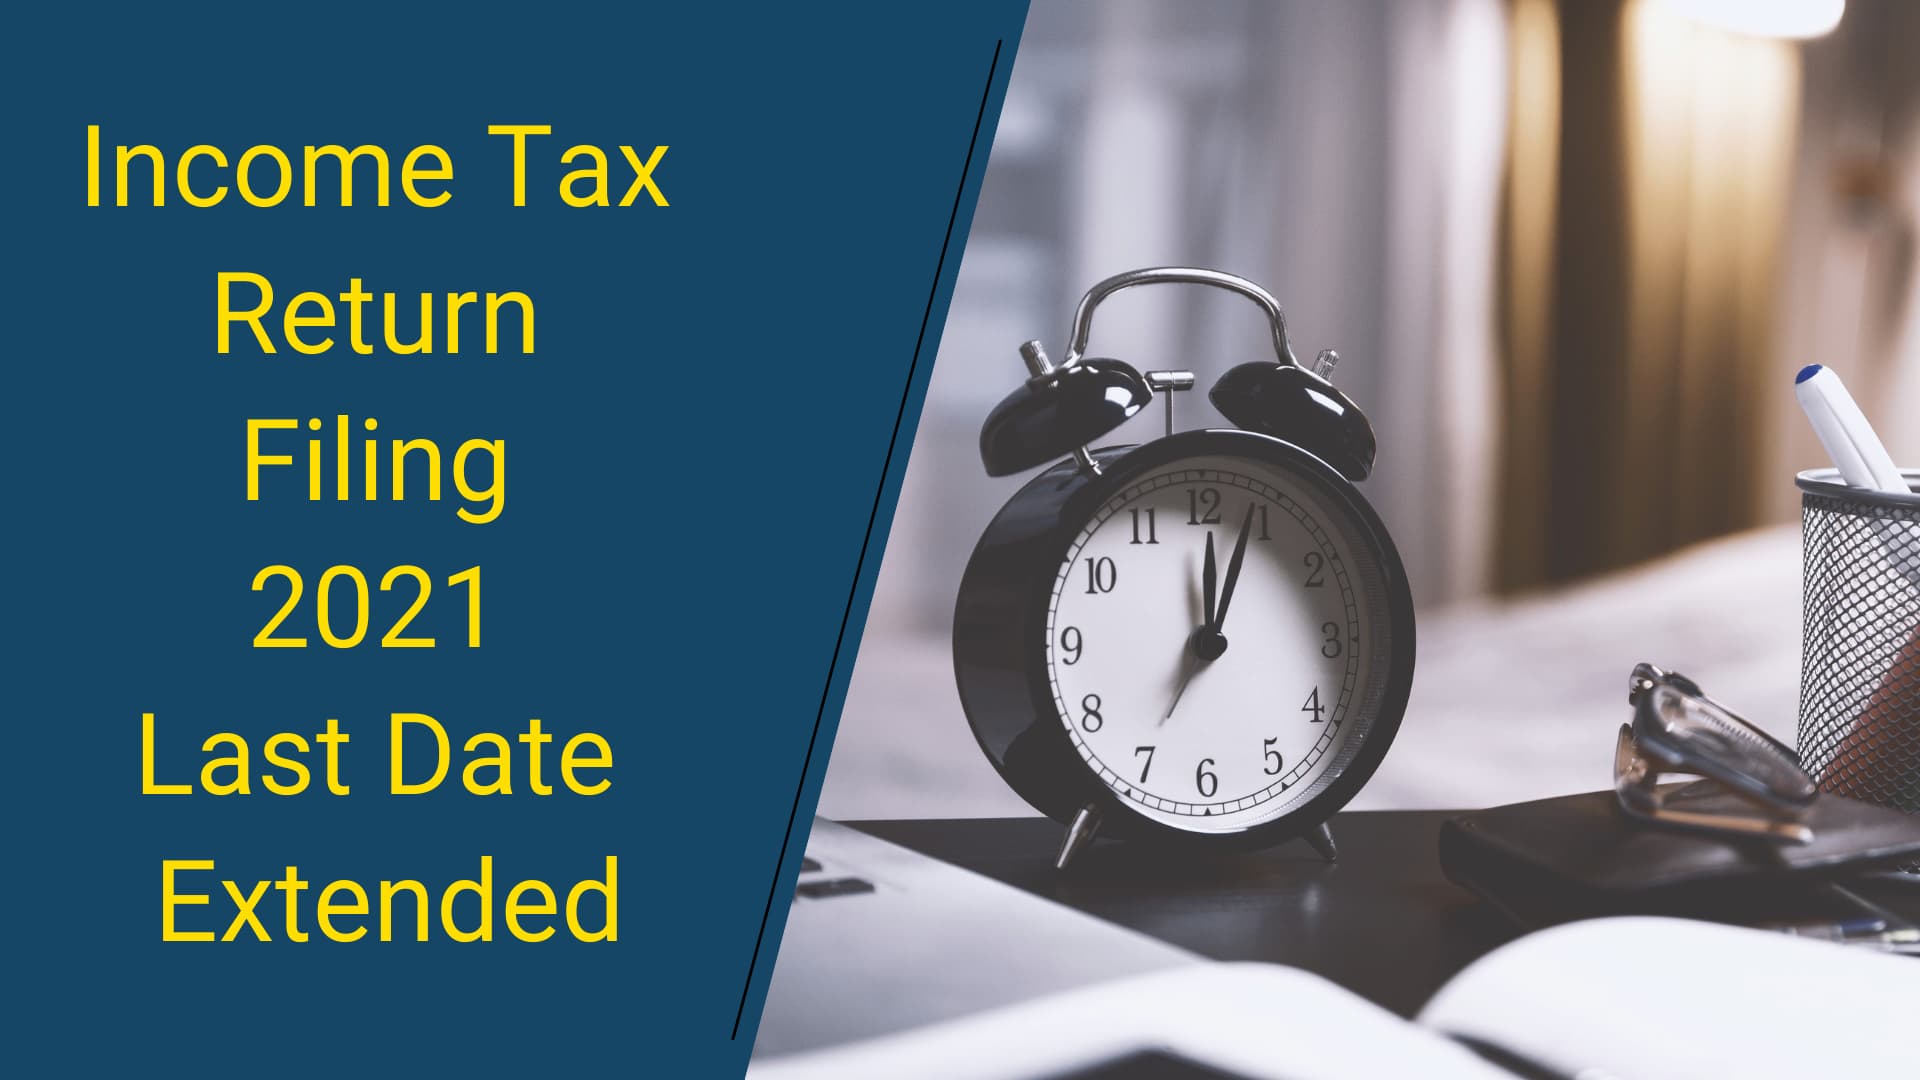 income tax form last date 2021 Income Tax Return Filing 2 Last Date Extended